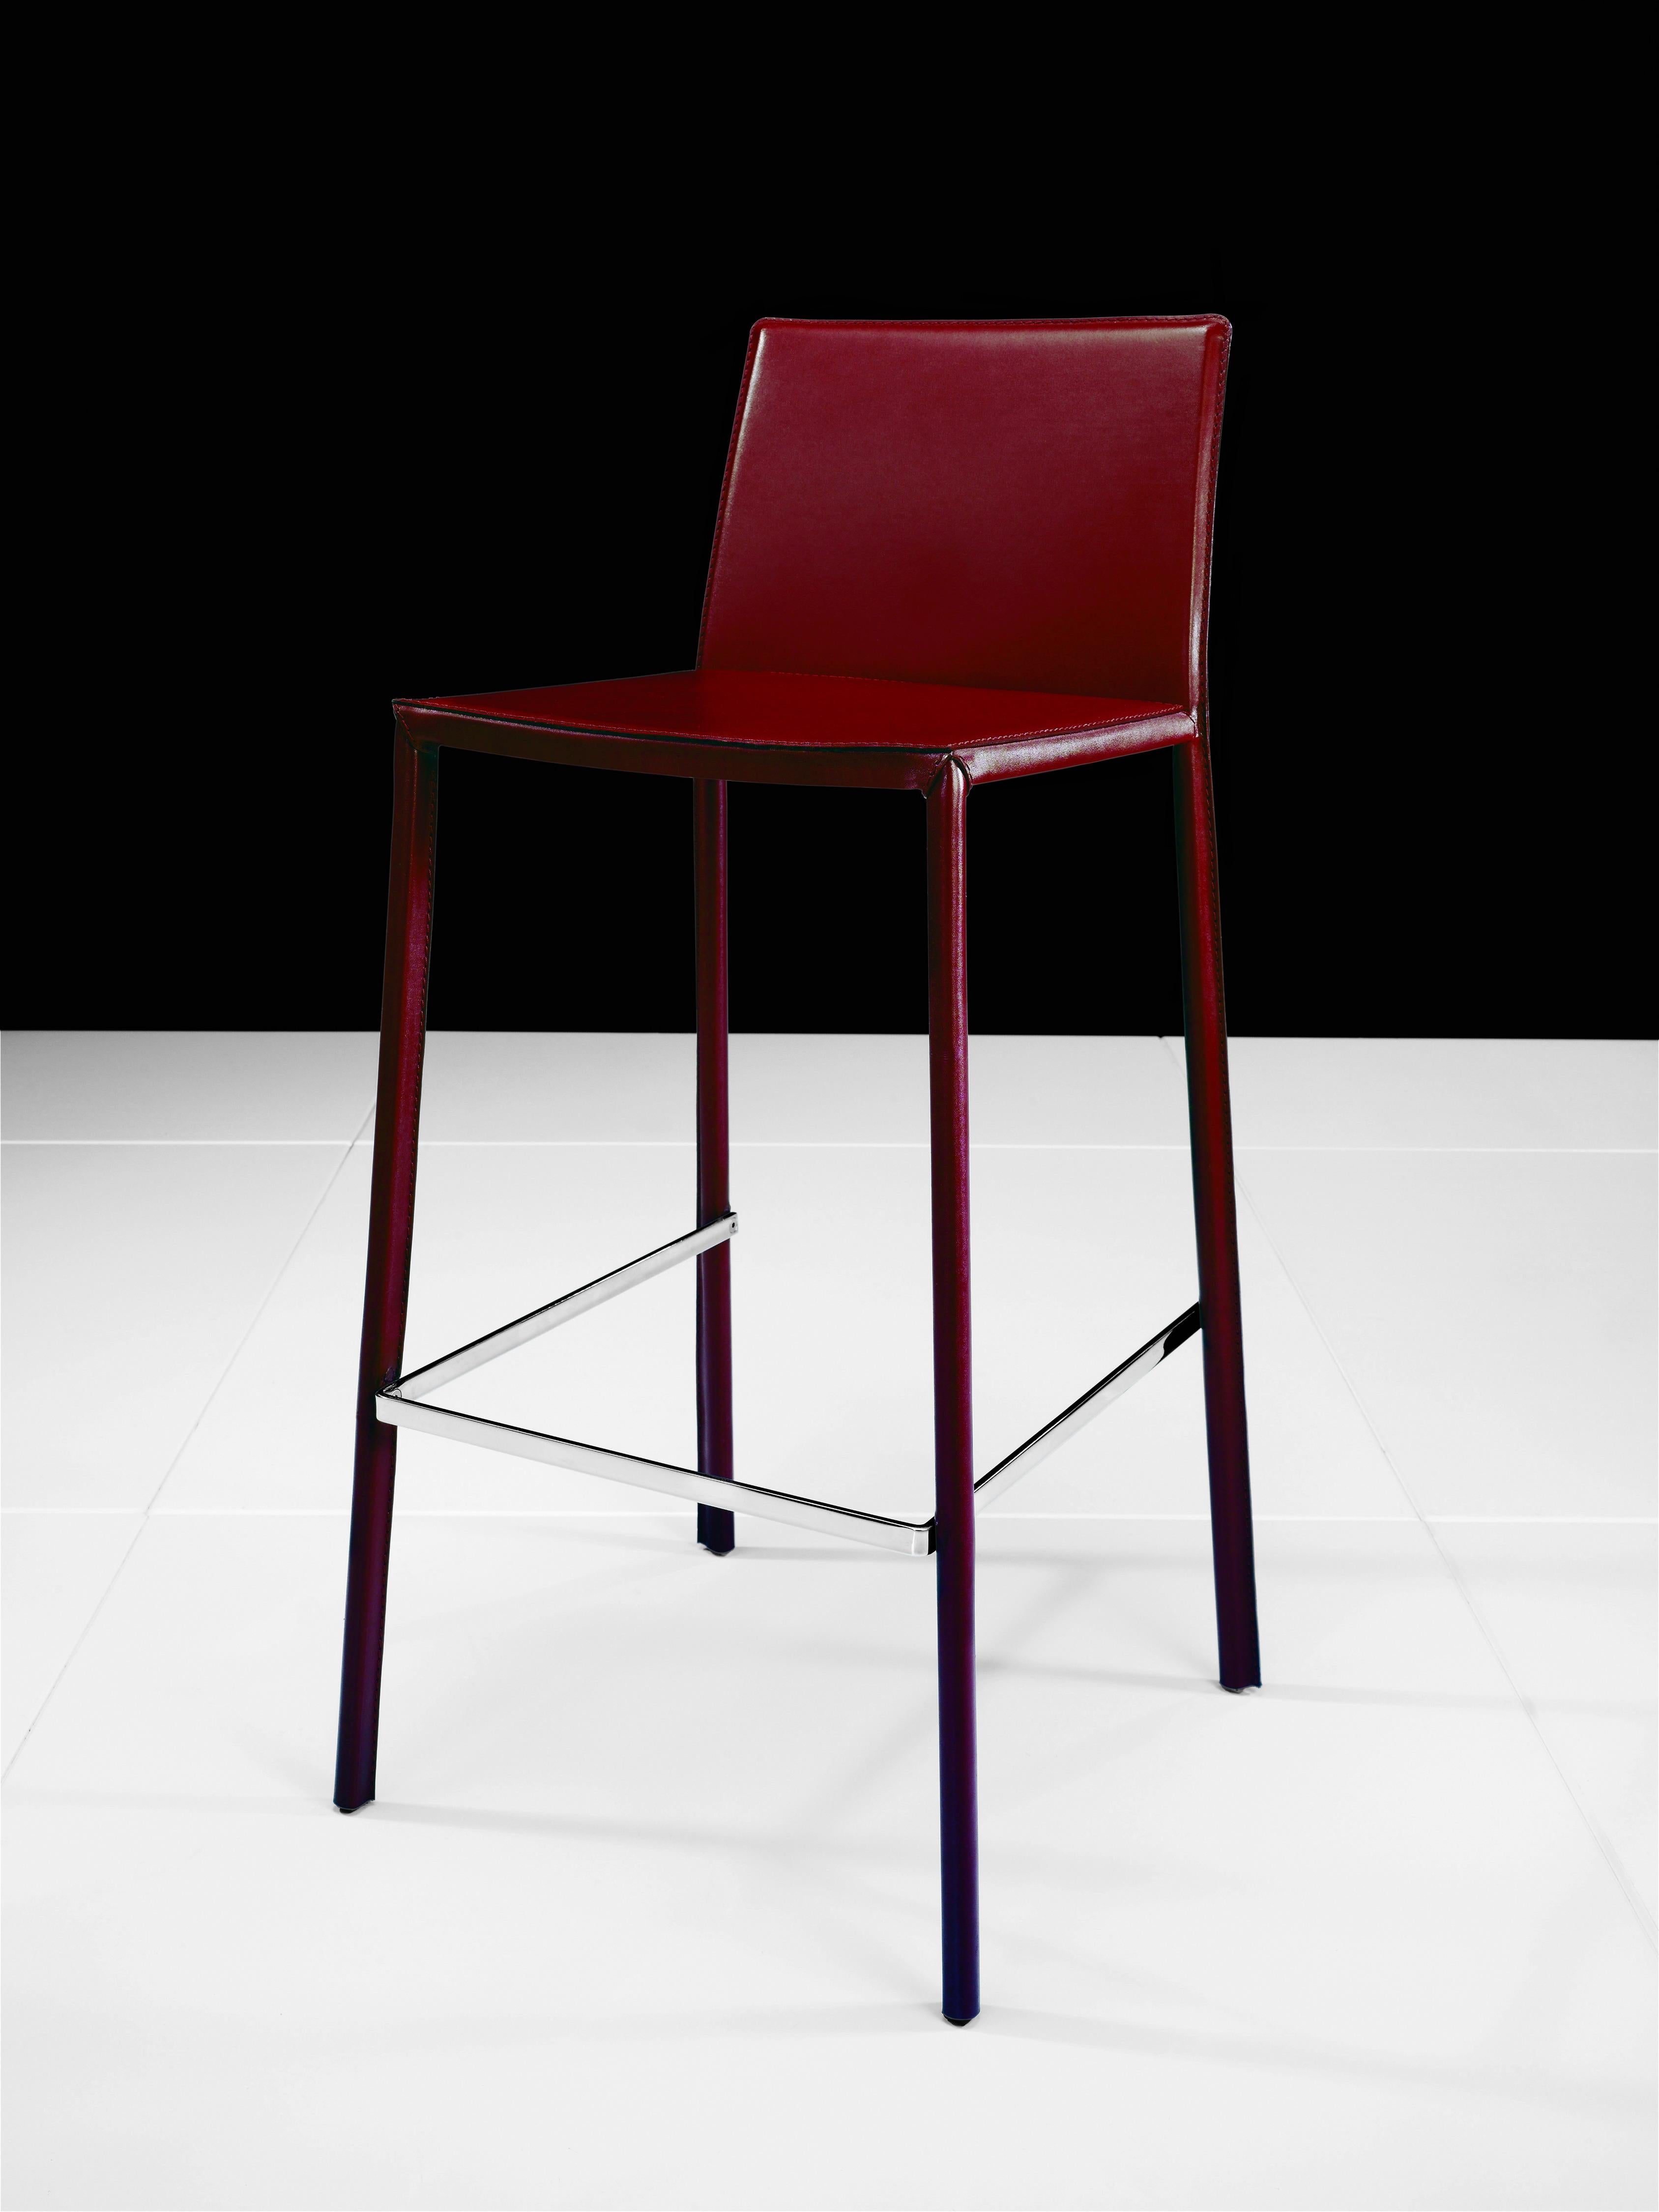 High Smart Bar Stool by Doimo Brasil
Dimensions: W 51 x D 50 x H 102 cm 
Materials: Smooth Reconst. Leather

Also available in W 51 x D 50 x H 86 cm, Seat Height: 60 cm. 

With the intention of providing good taste and personality, Doimo deciphers